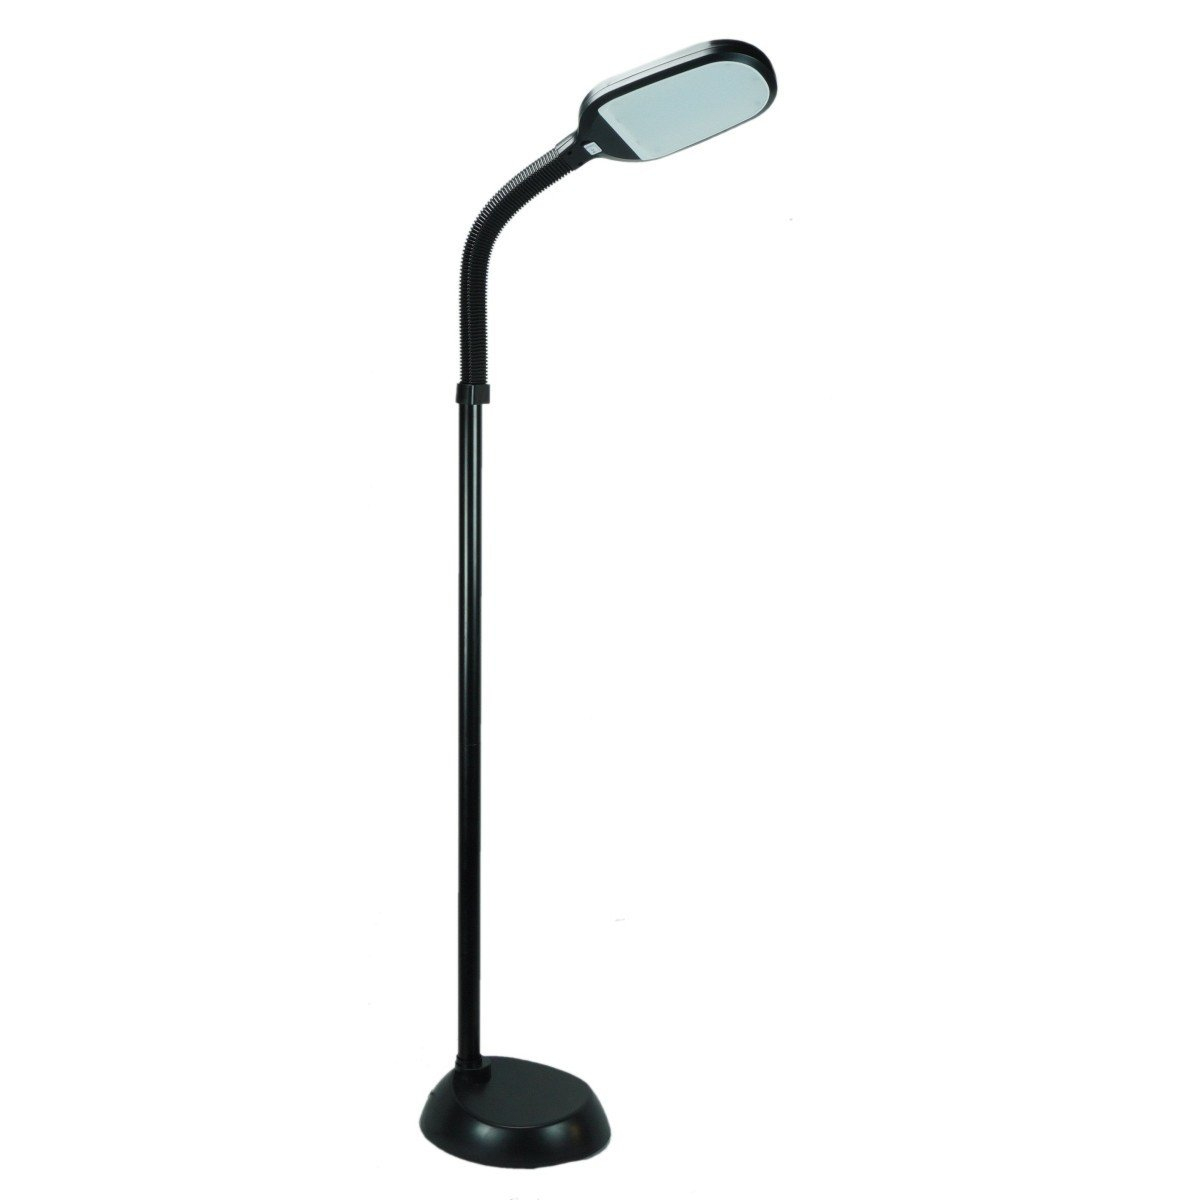 Brightest Led Floor Lamp Brightest Led Torchiere Floor Lamp intended for size 1200 X 1200